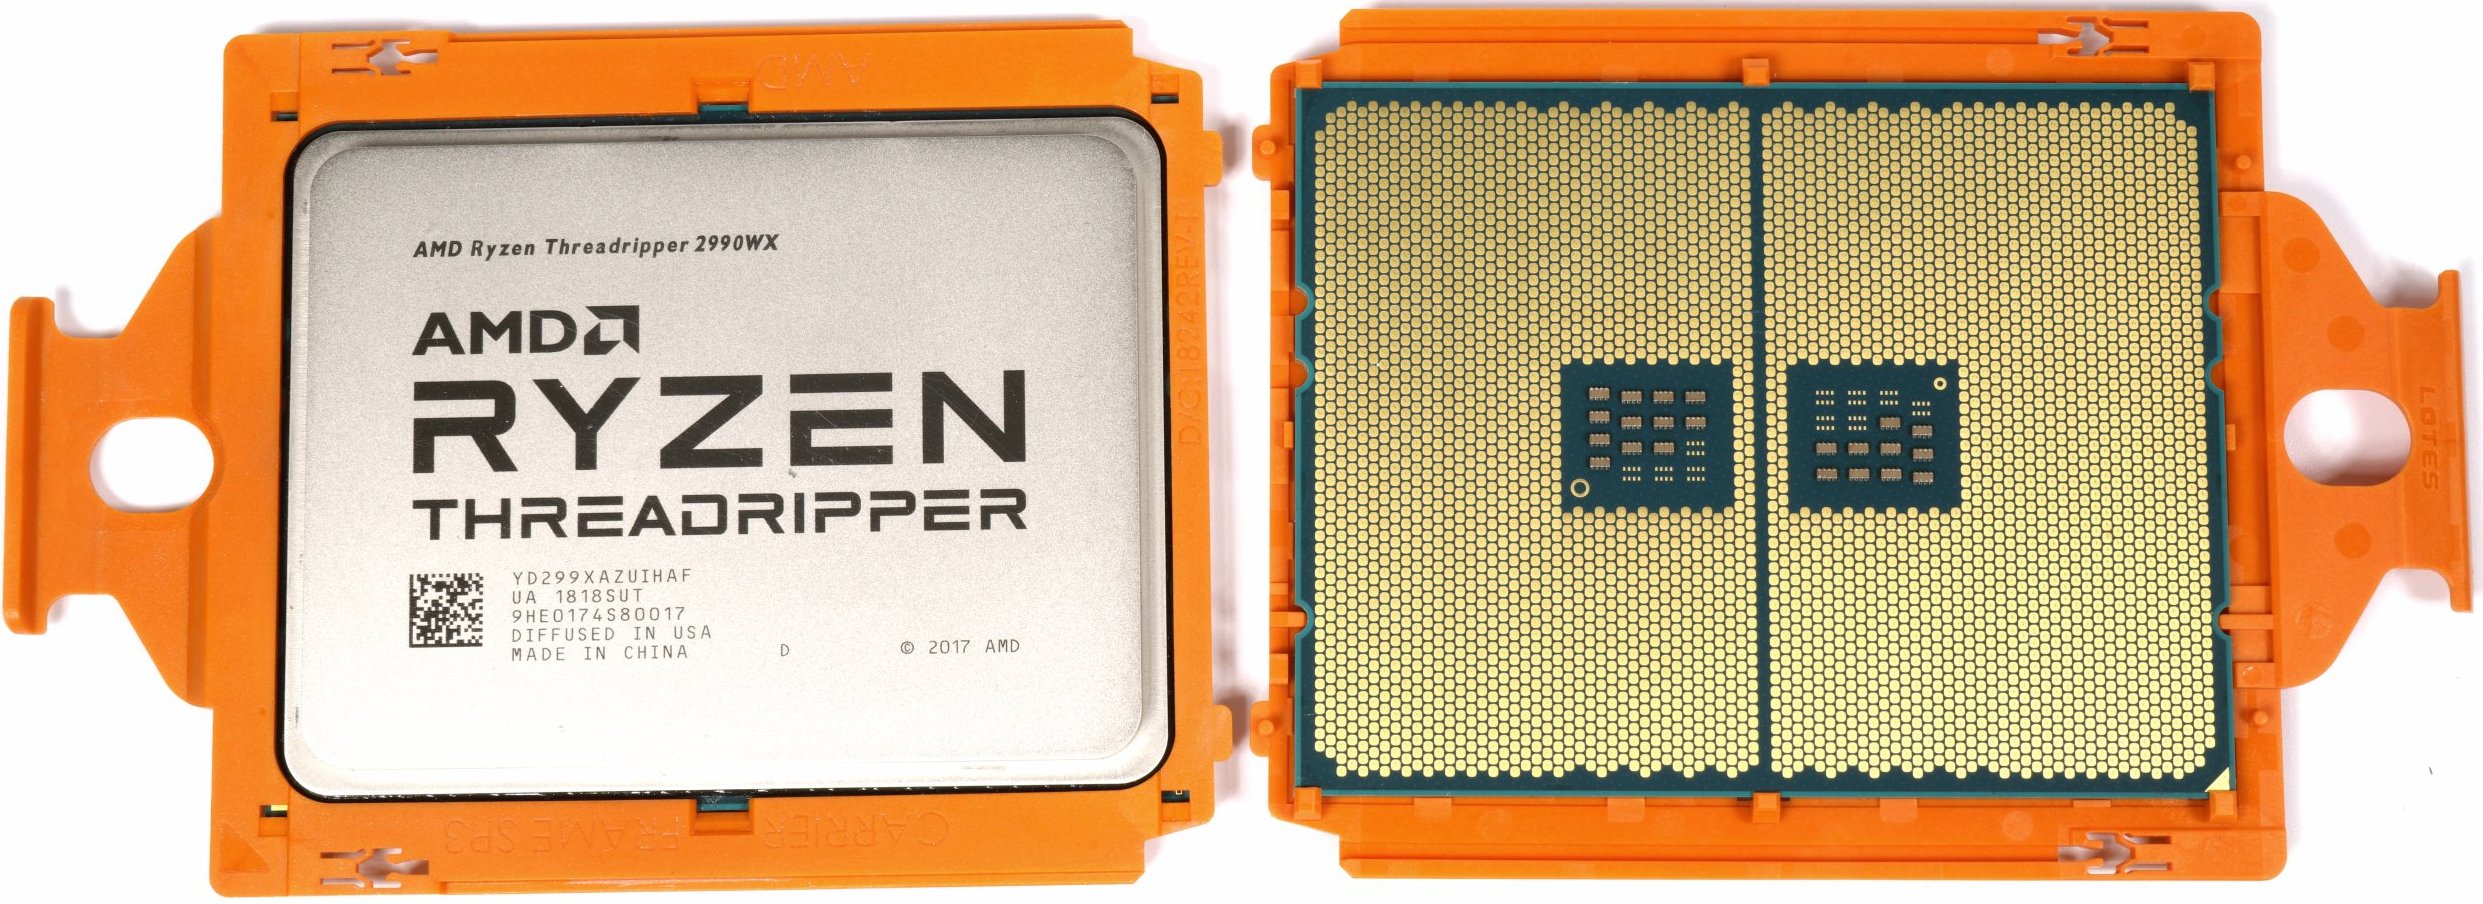 Wet in the meantime the latter AMD Ryzen Threadripper 2990WX and 2950X in review - Real progress with up  to 32 cores | igor´sLAB